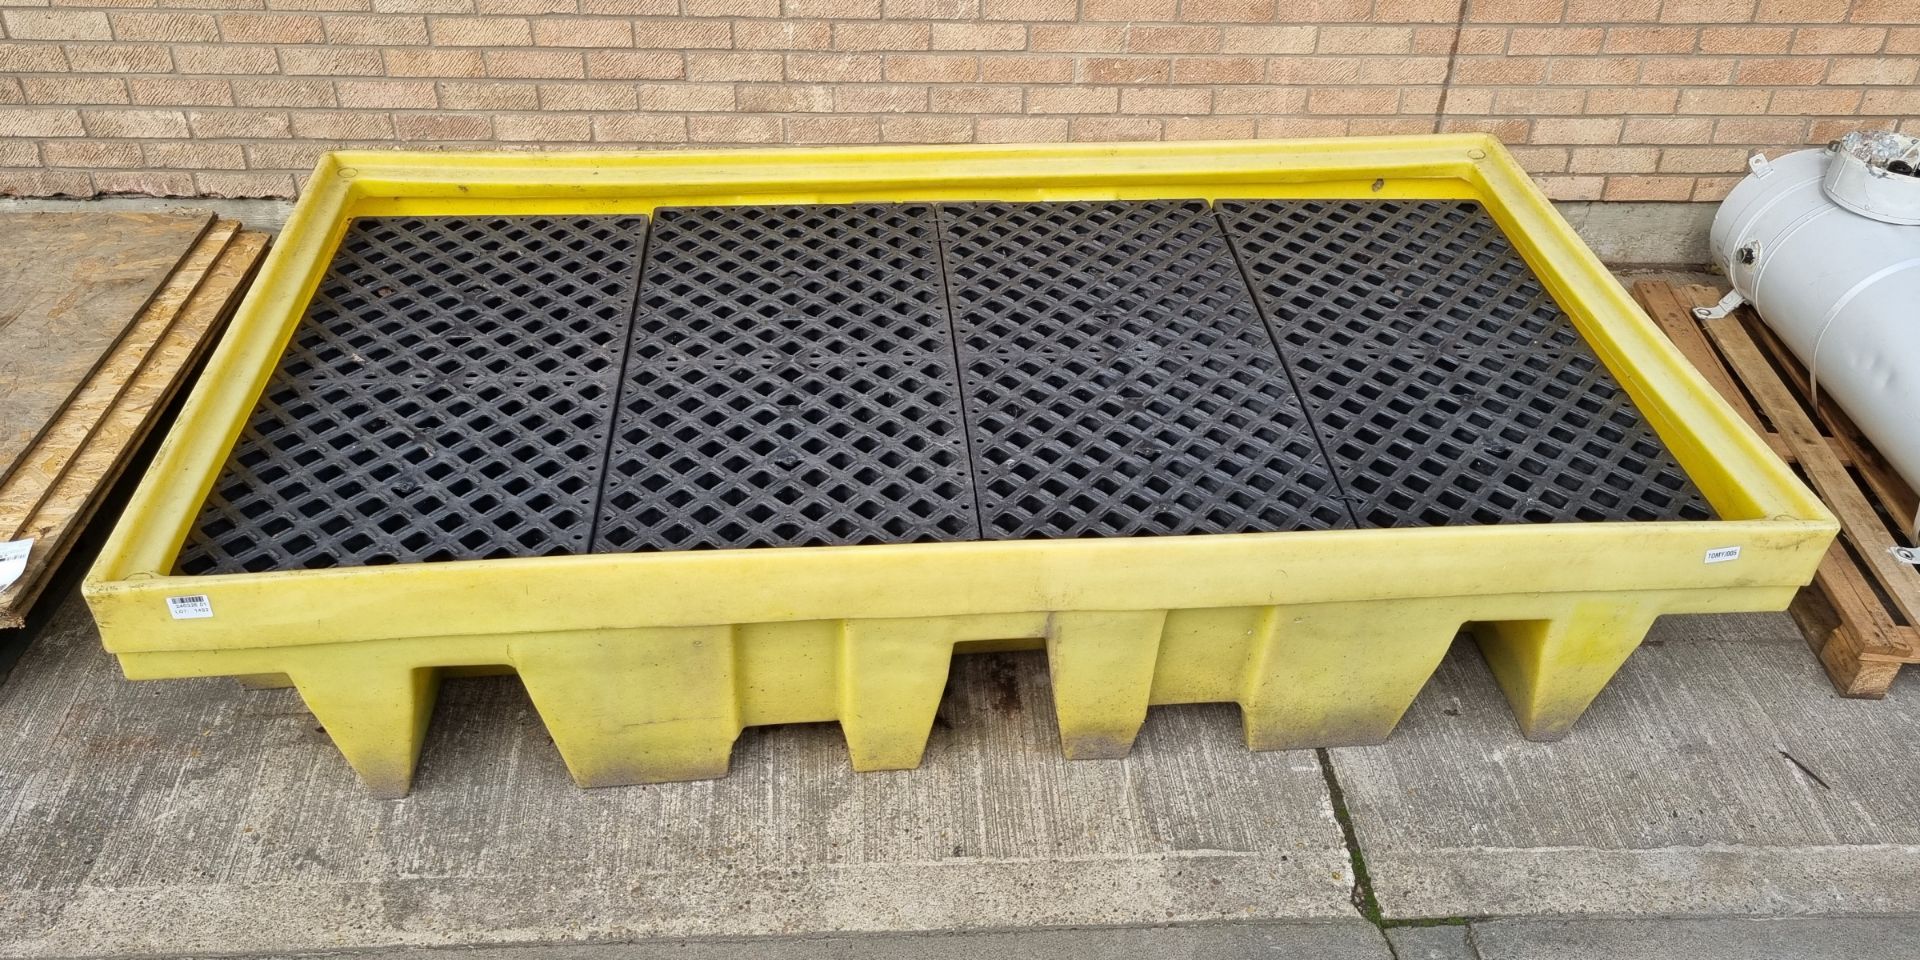 Double IBC spill pallet bund (2x 1000L) with removable grid - W 2530 x D 1340 x H 500mm - Image 2 of 4